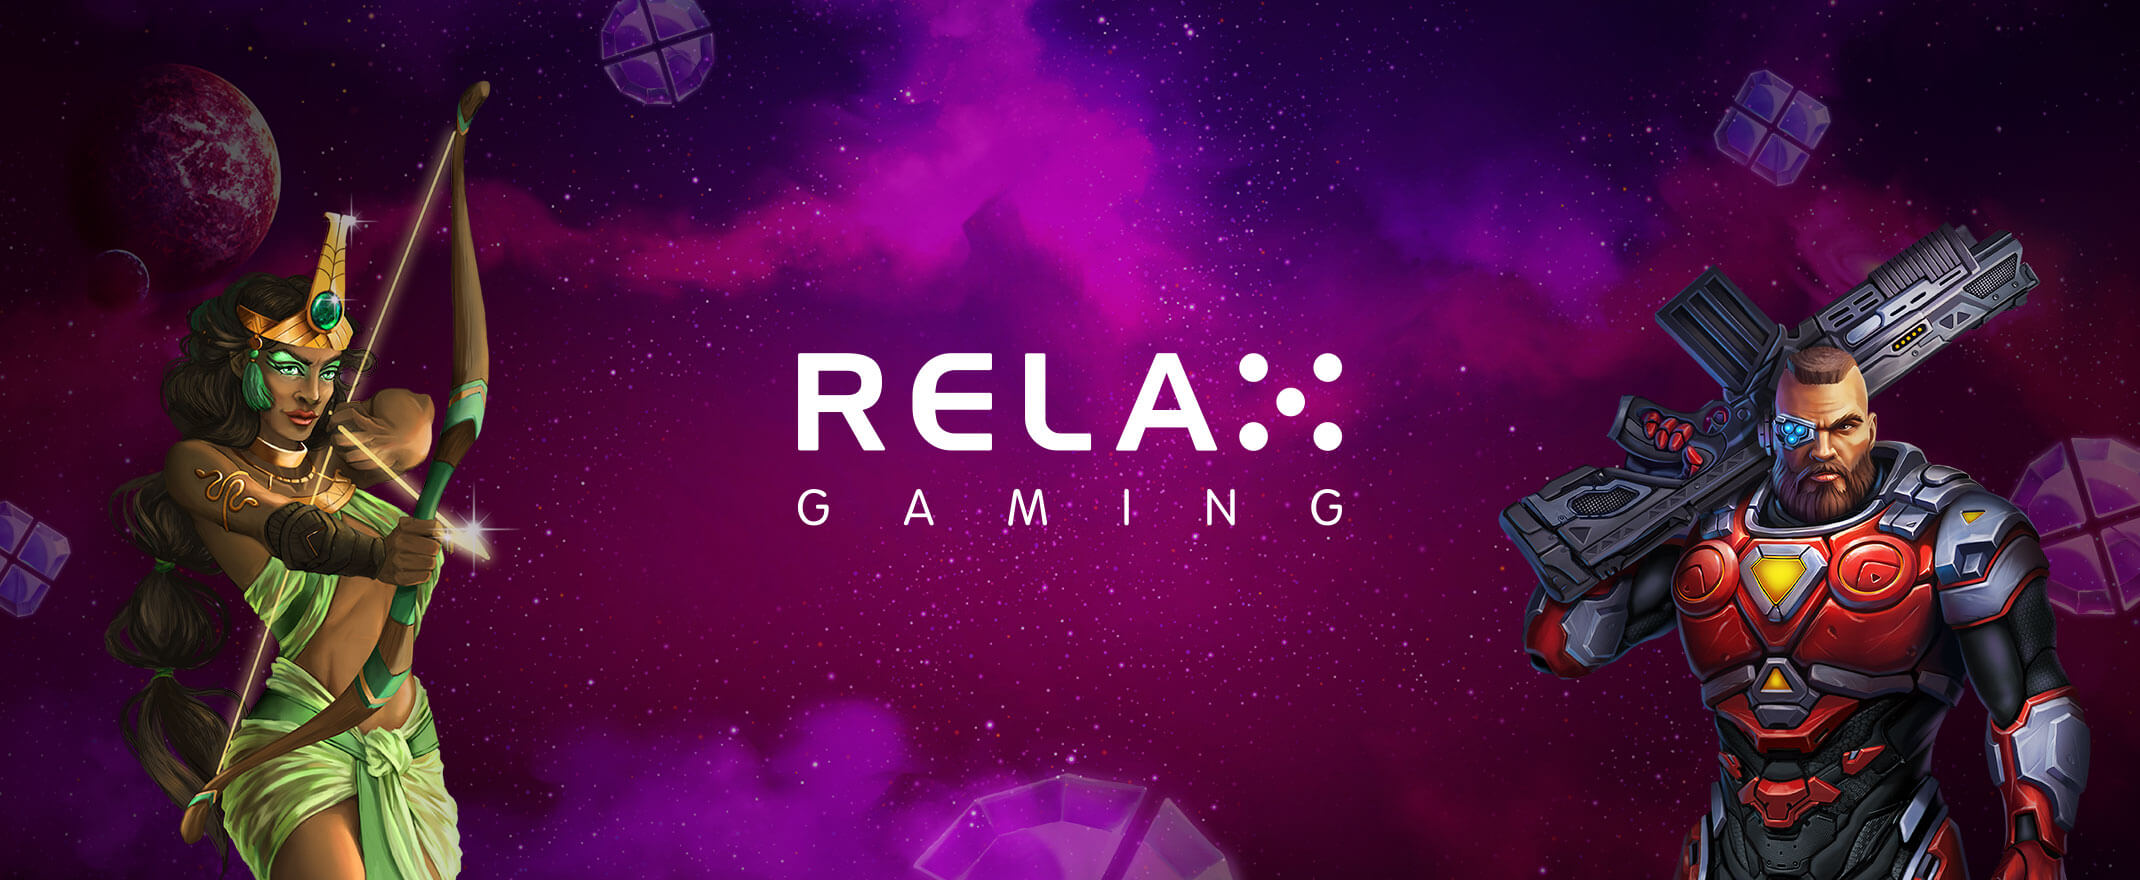 Relax Gaming logo on purple background with slot character assets